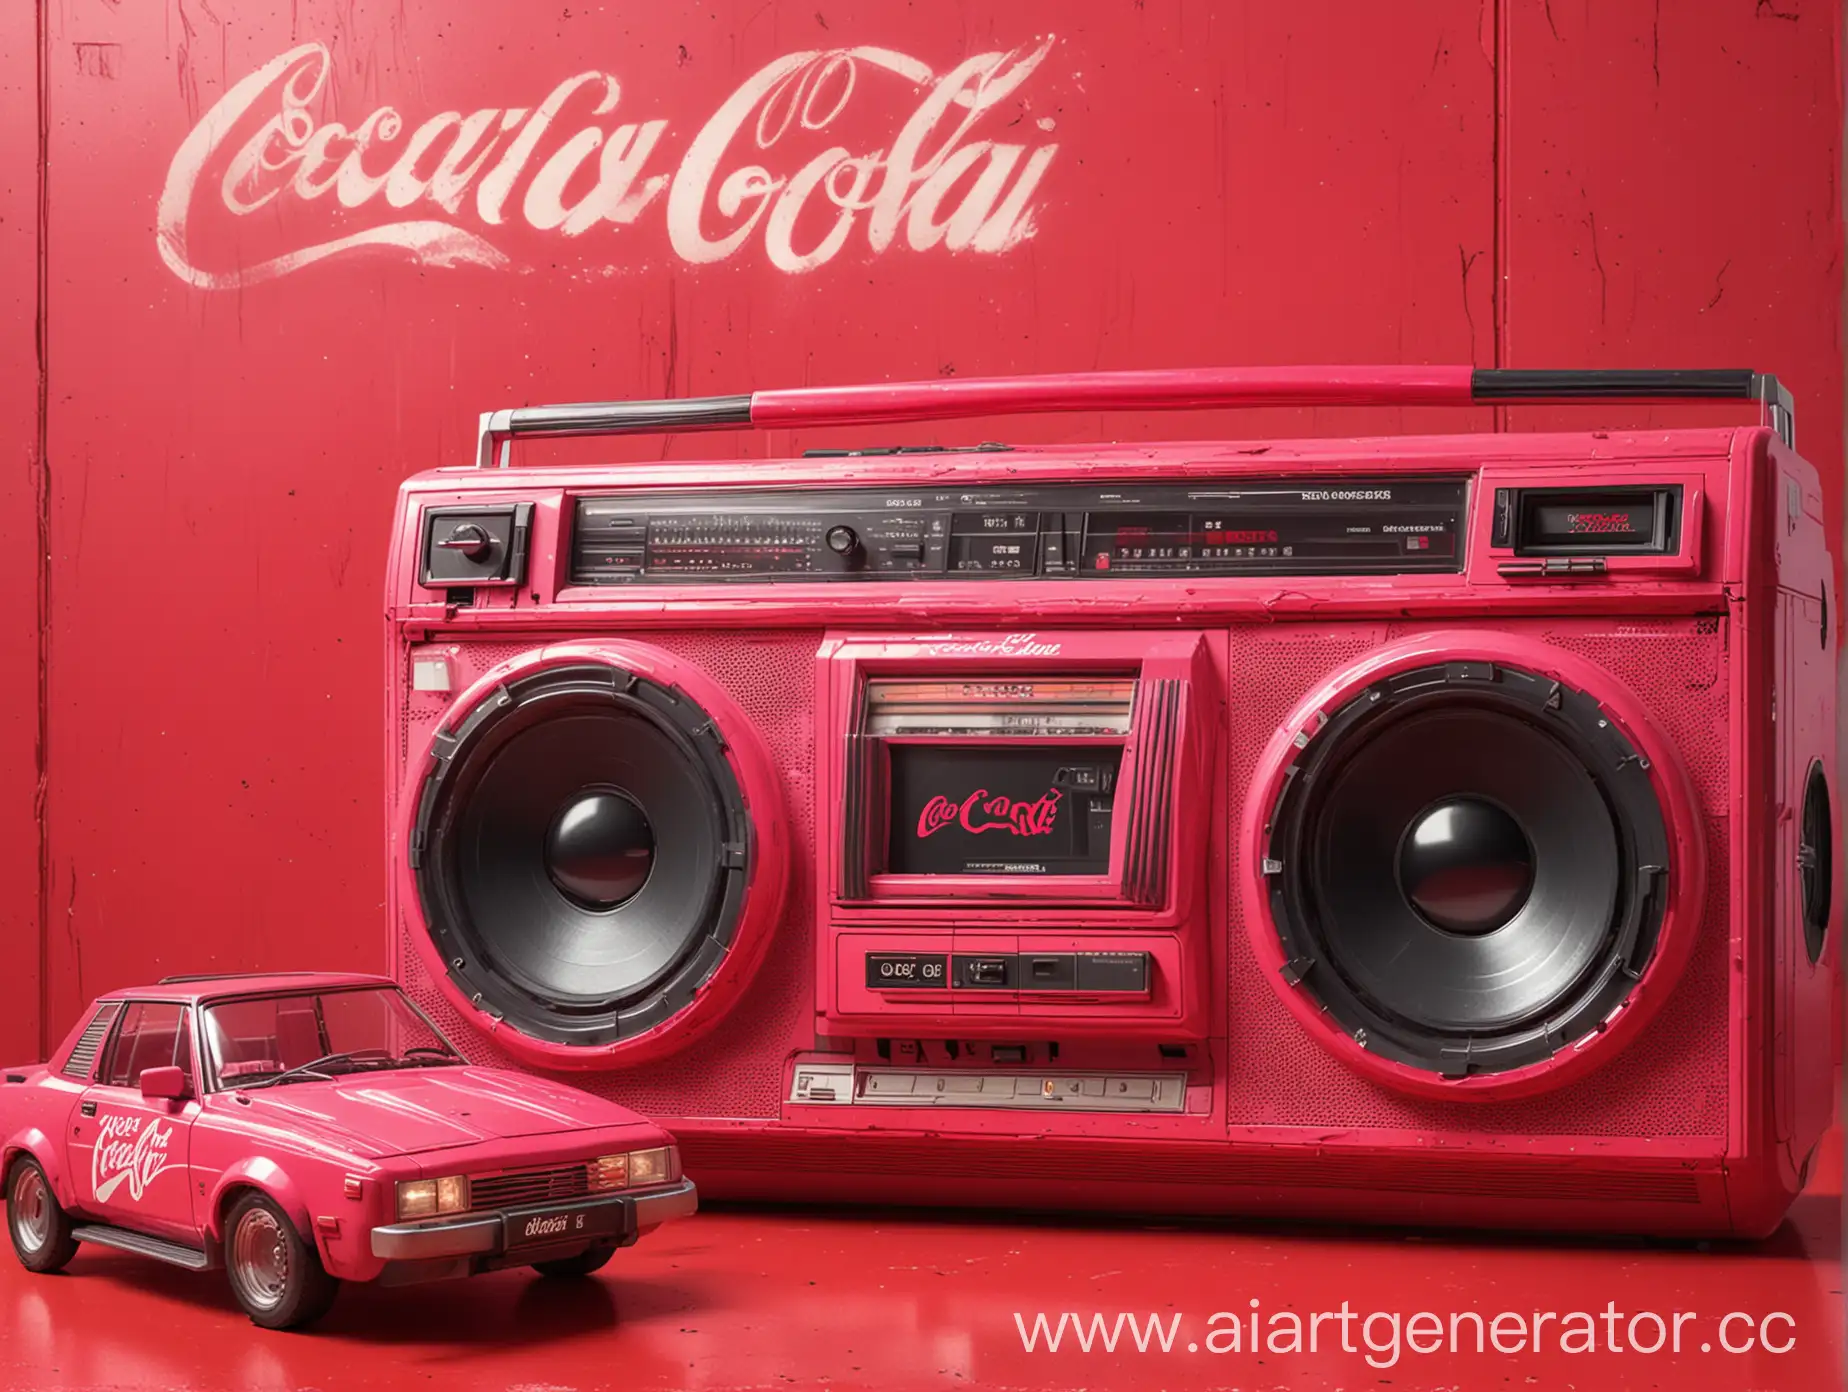 Nostalgic-1980s-Boombox-and-CocaCola-Poster-in-Vibrant-Pink-and-Red-Composition